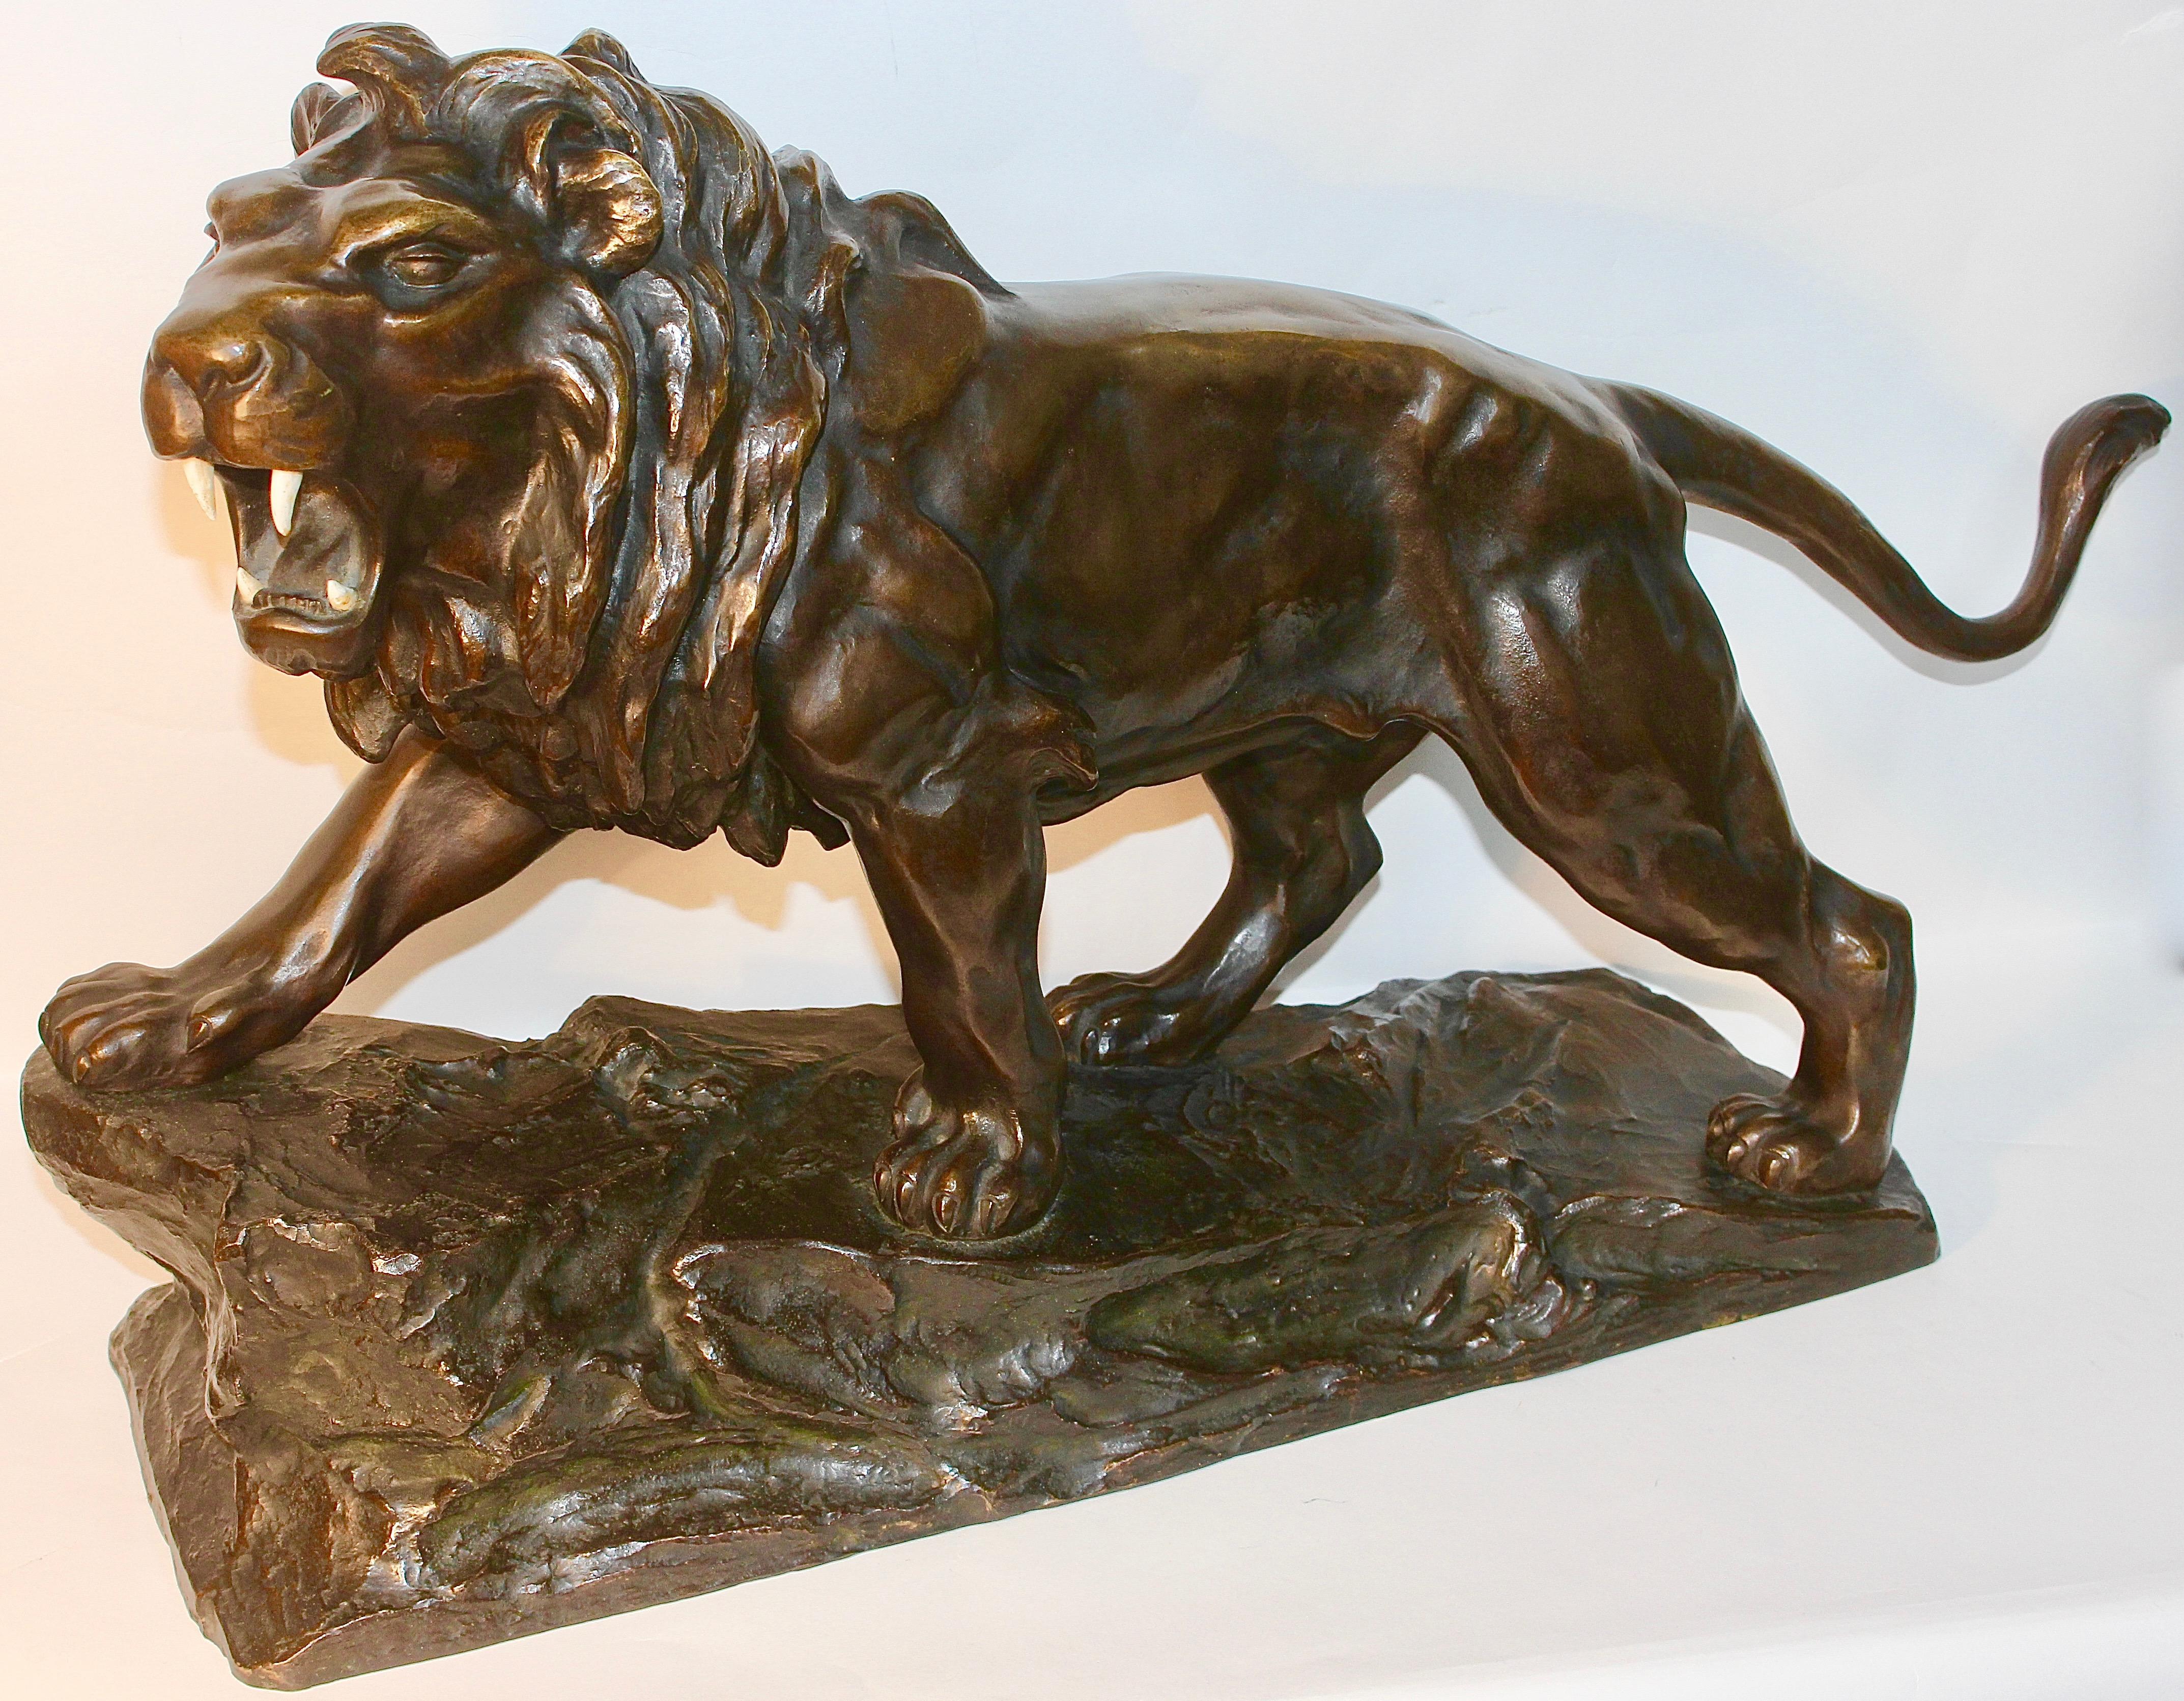 Large, antique and very fine bronze sculpture. Striding, roaring lion.
The sculpture is very heavy.